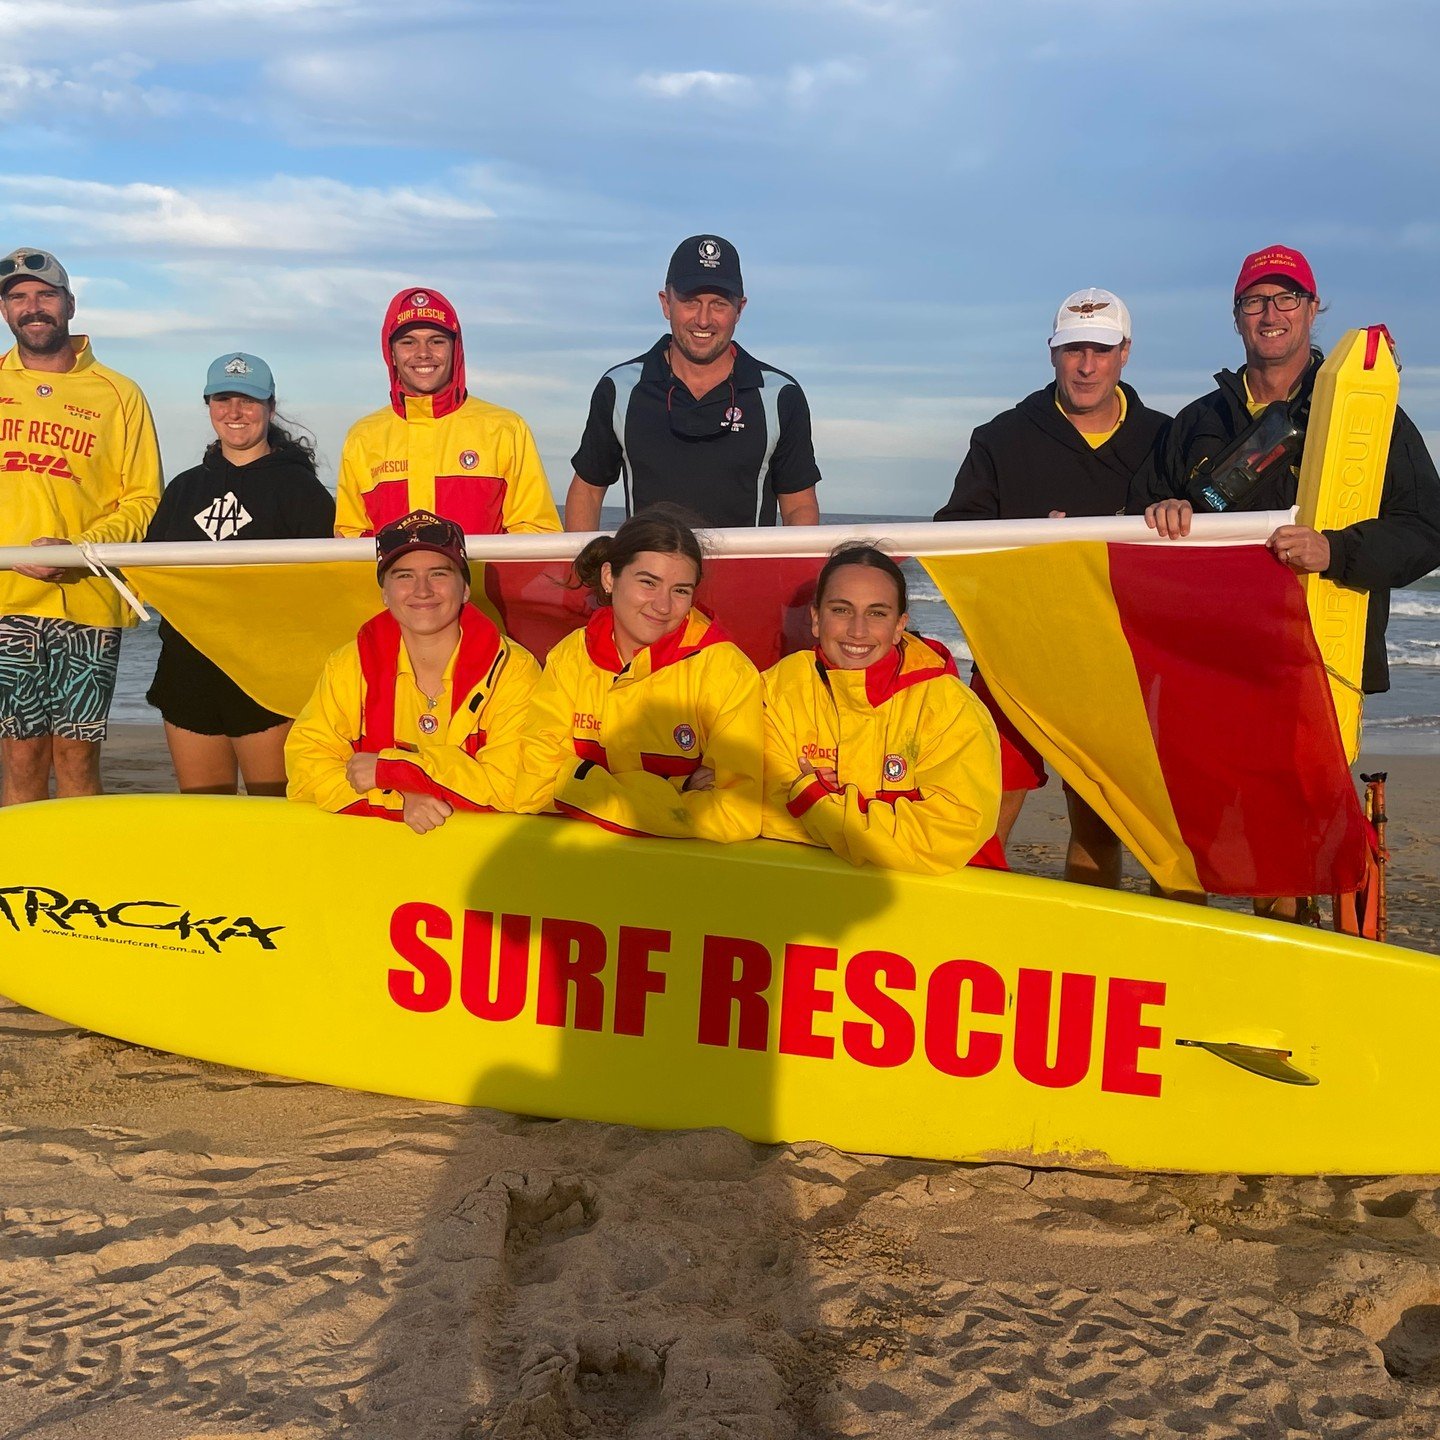 IT&rsquo;S A WRAP // LIFESAVING // THANK YOU very much to patrol teams 1 (AM shift) and 5 (PM shift), members who accepted swaps and additional volunteers for your service this last day of the 2023-24 patrolling season. A massive shout out also to al